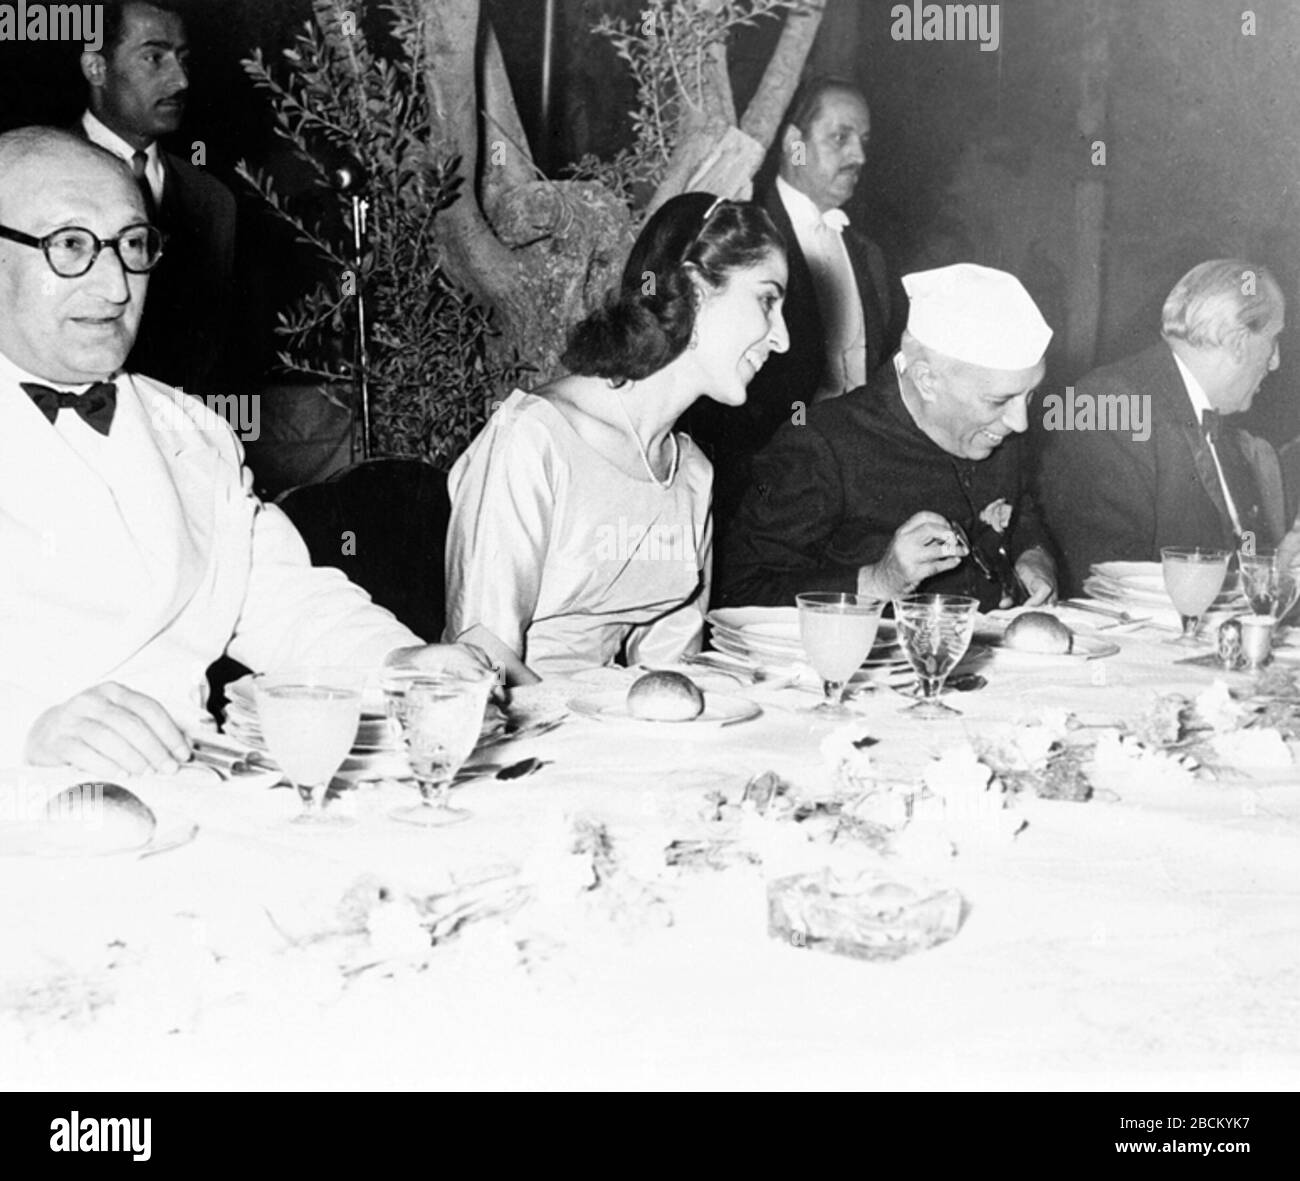 'English: E.A.Min./June,1956,A22a(i)Photograph taken at the banquet given in honour of the Prime Minister, Shri Jawaharlal Nehru, by H.E. Shukri Kuwatly, President of Syria, at Damascus during the Prime Minister’s visit to Syria in June, 1956.L to R:- H.E. Sabri Assali, Syrian Prime Minister, Miss Huda Kuwatly, the daughter of the Syrian President; the Prime Minister, Shri Jawaharlal Nehru; H.E. Shukri Kwatly and Smt. Indira Gandhi.; June 1956; http://photodivision.gov.in/writereaddata/webimages/thumbnails/52331.jpg; Photo Division, Ministry of Information & Broadcasting, Government of India; Stock Photo